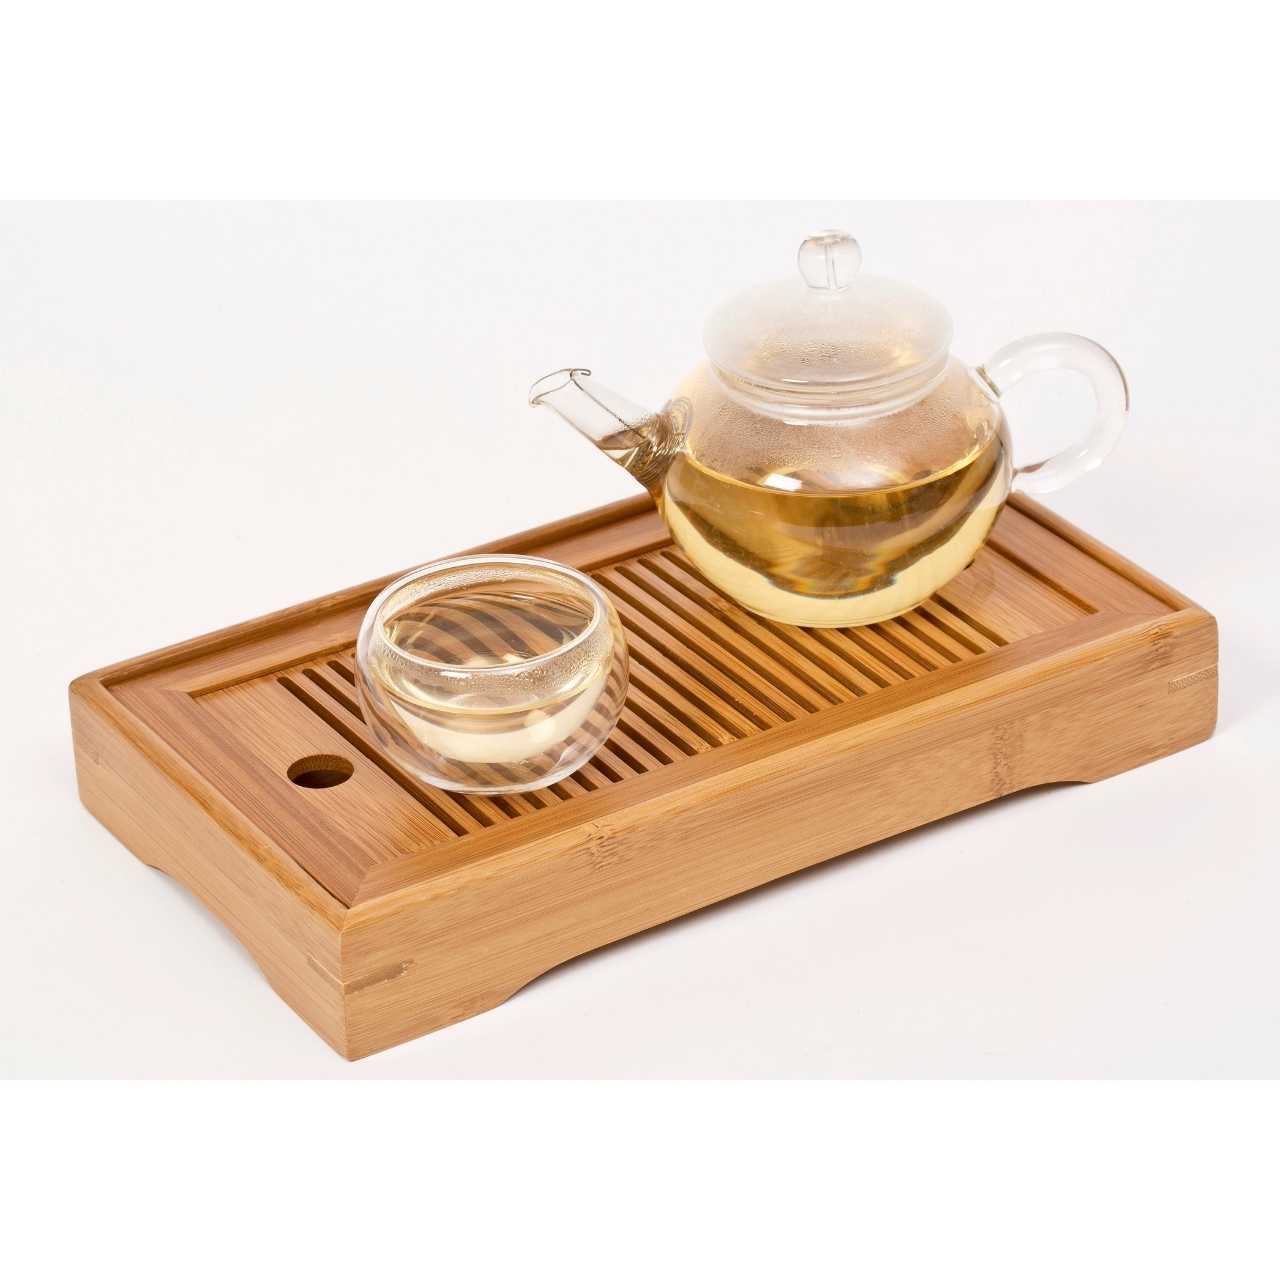 Ceremonial Bamboo water Tray with glass teapot and small double walled cup